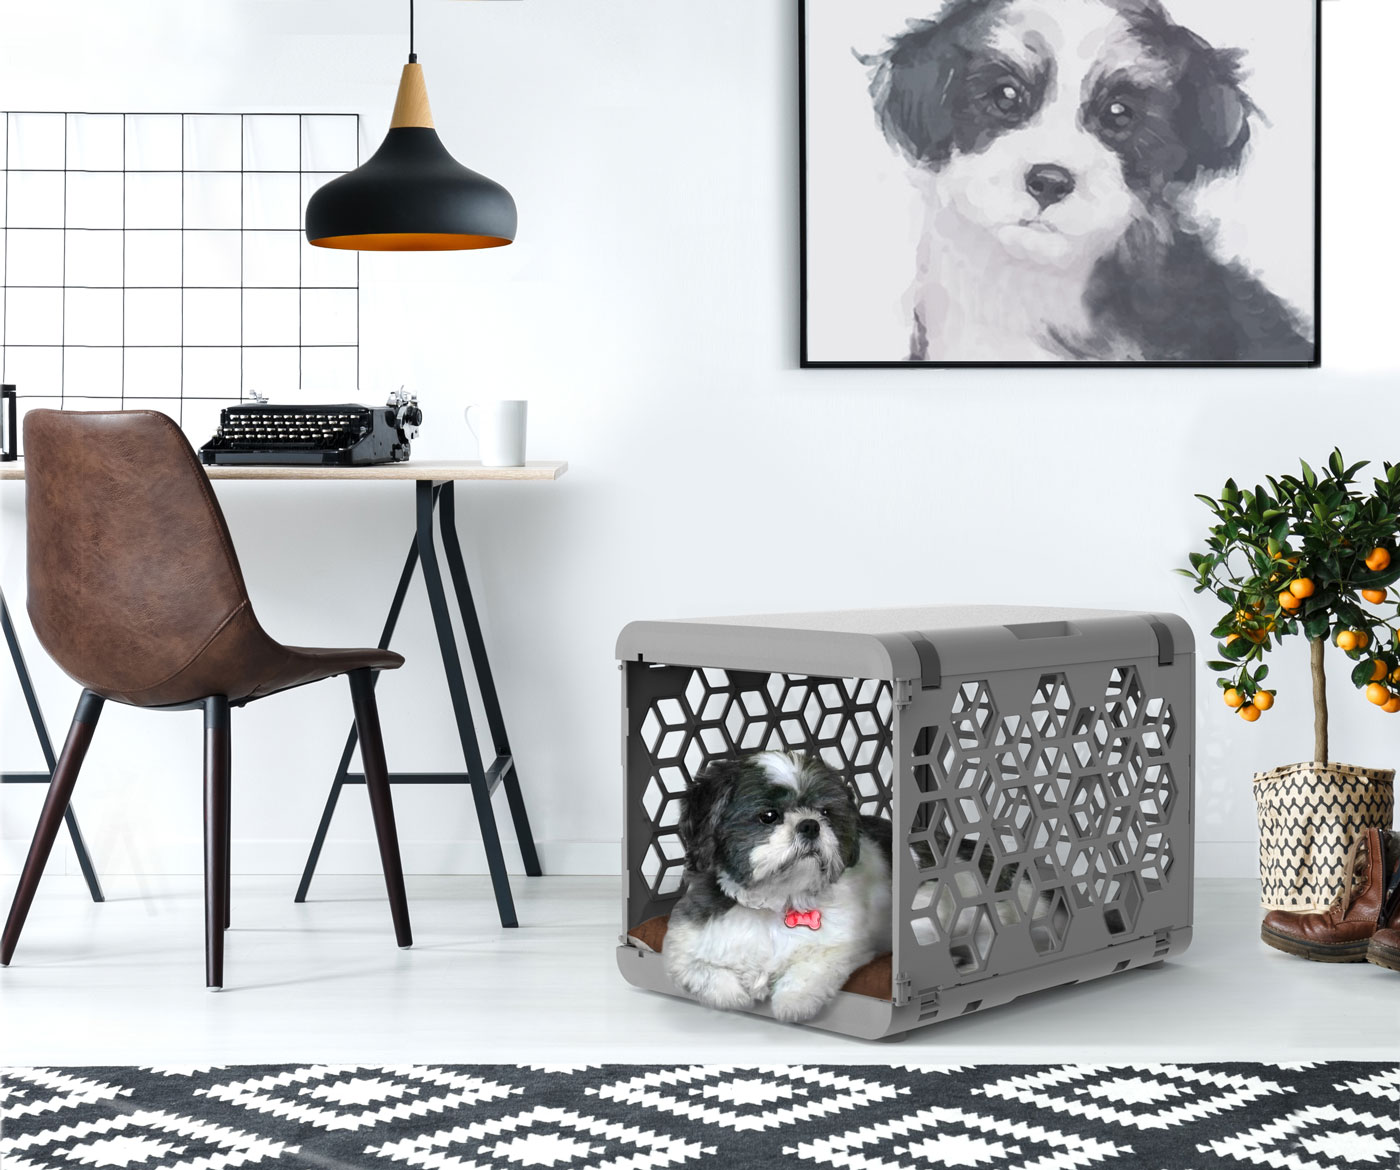 Amy Kim of Chasing Monkey had one goal when she launched PAWD: to create a premium, stylish dog crate that is also affordable.  She succeeded! This crate is functional, gorgeous, and portable with a target price well under $100. Want to learn more? Check out our interview with Amy and enter to win one of your own!